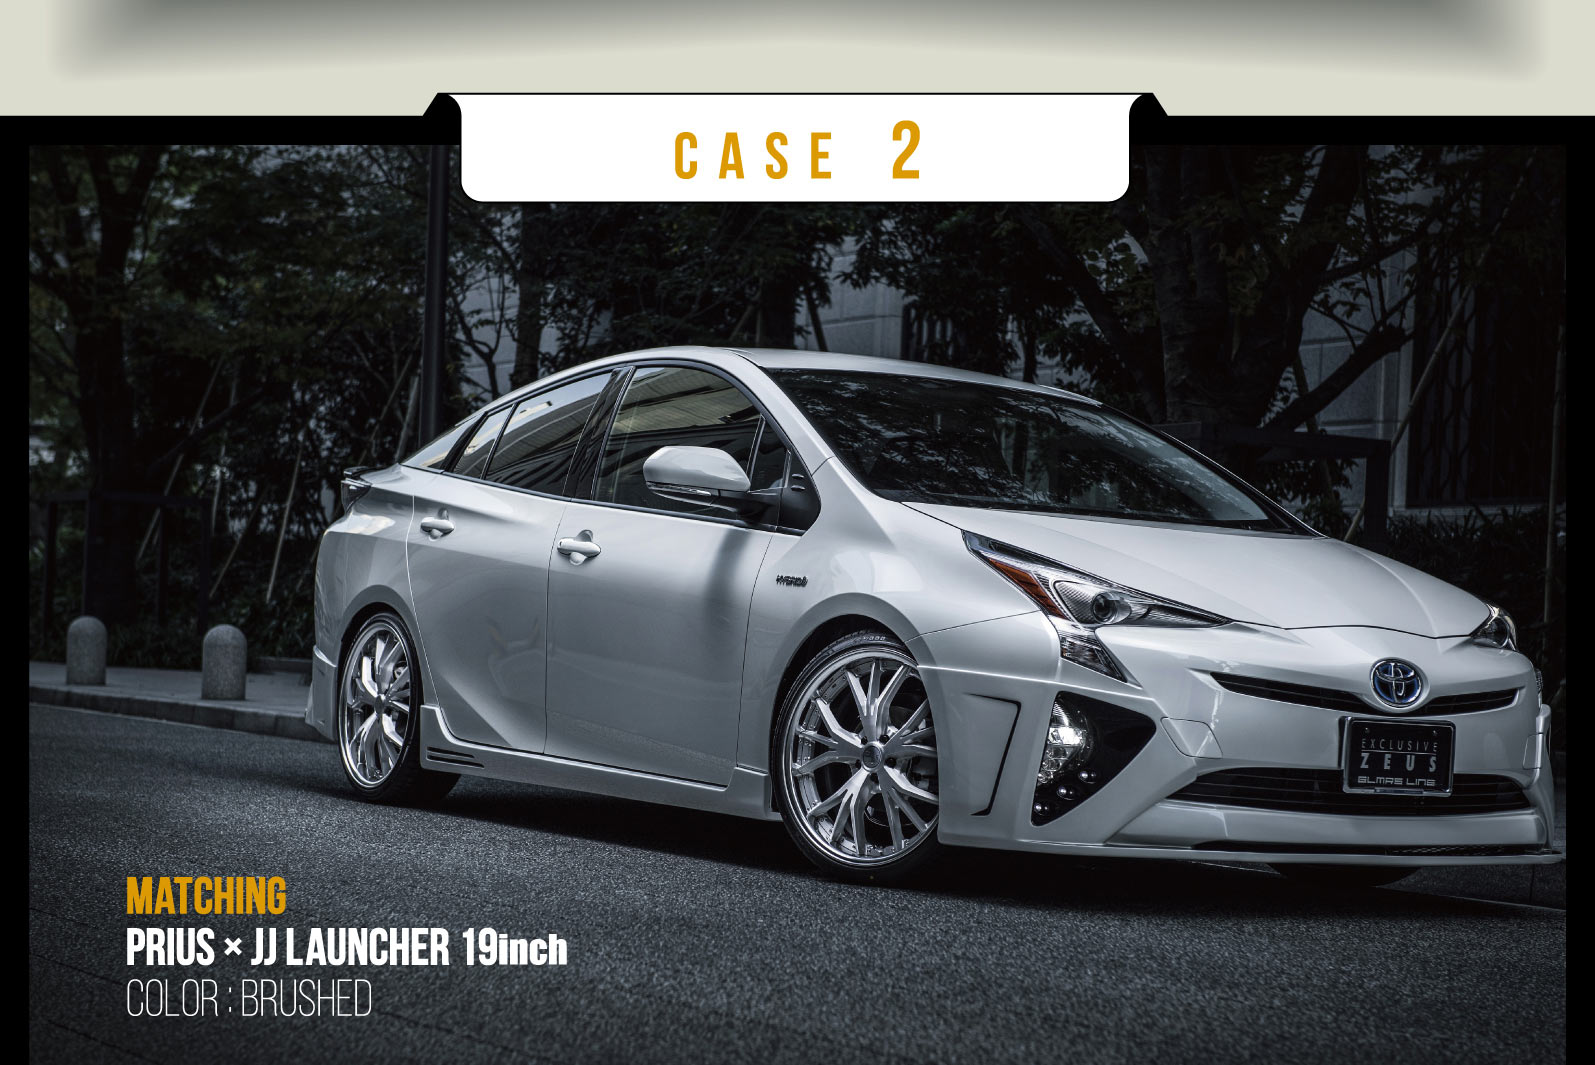 CASE 2 MATCHING PRIUS × JJ Launcher 19inch COLOR : BRUSHED